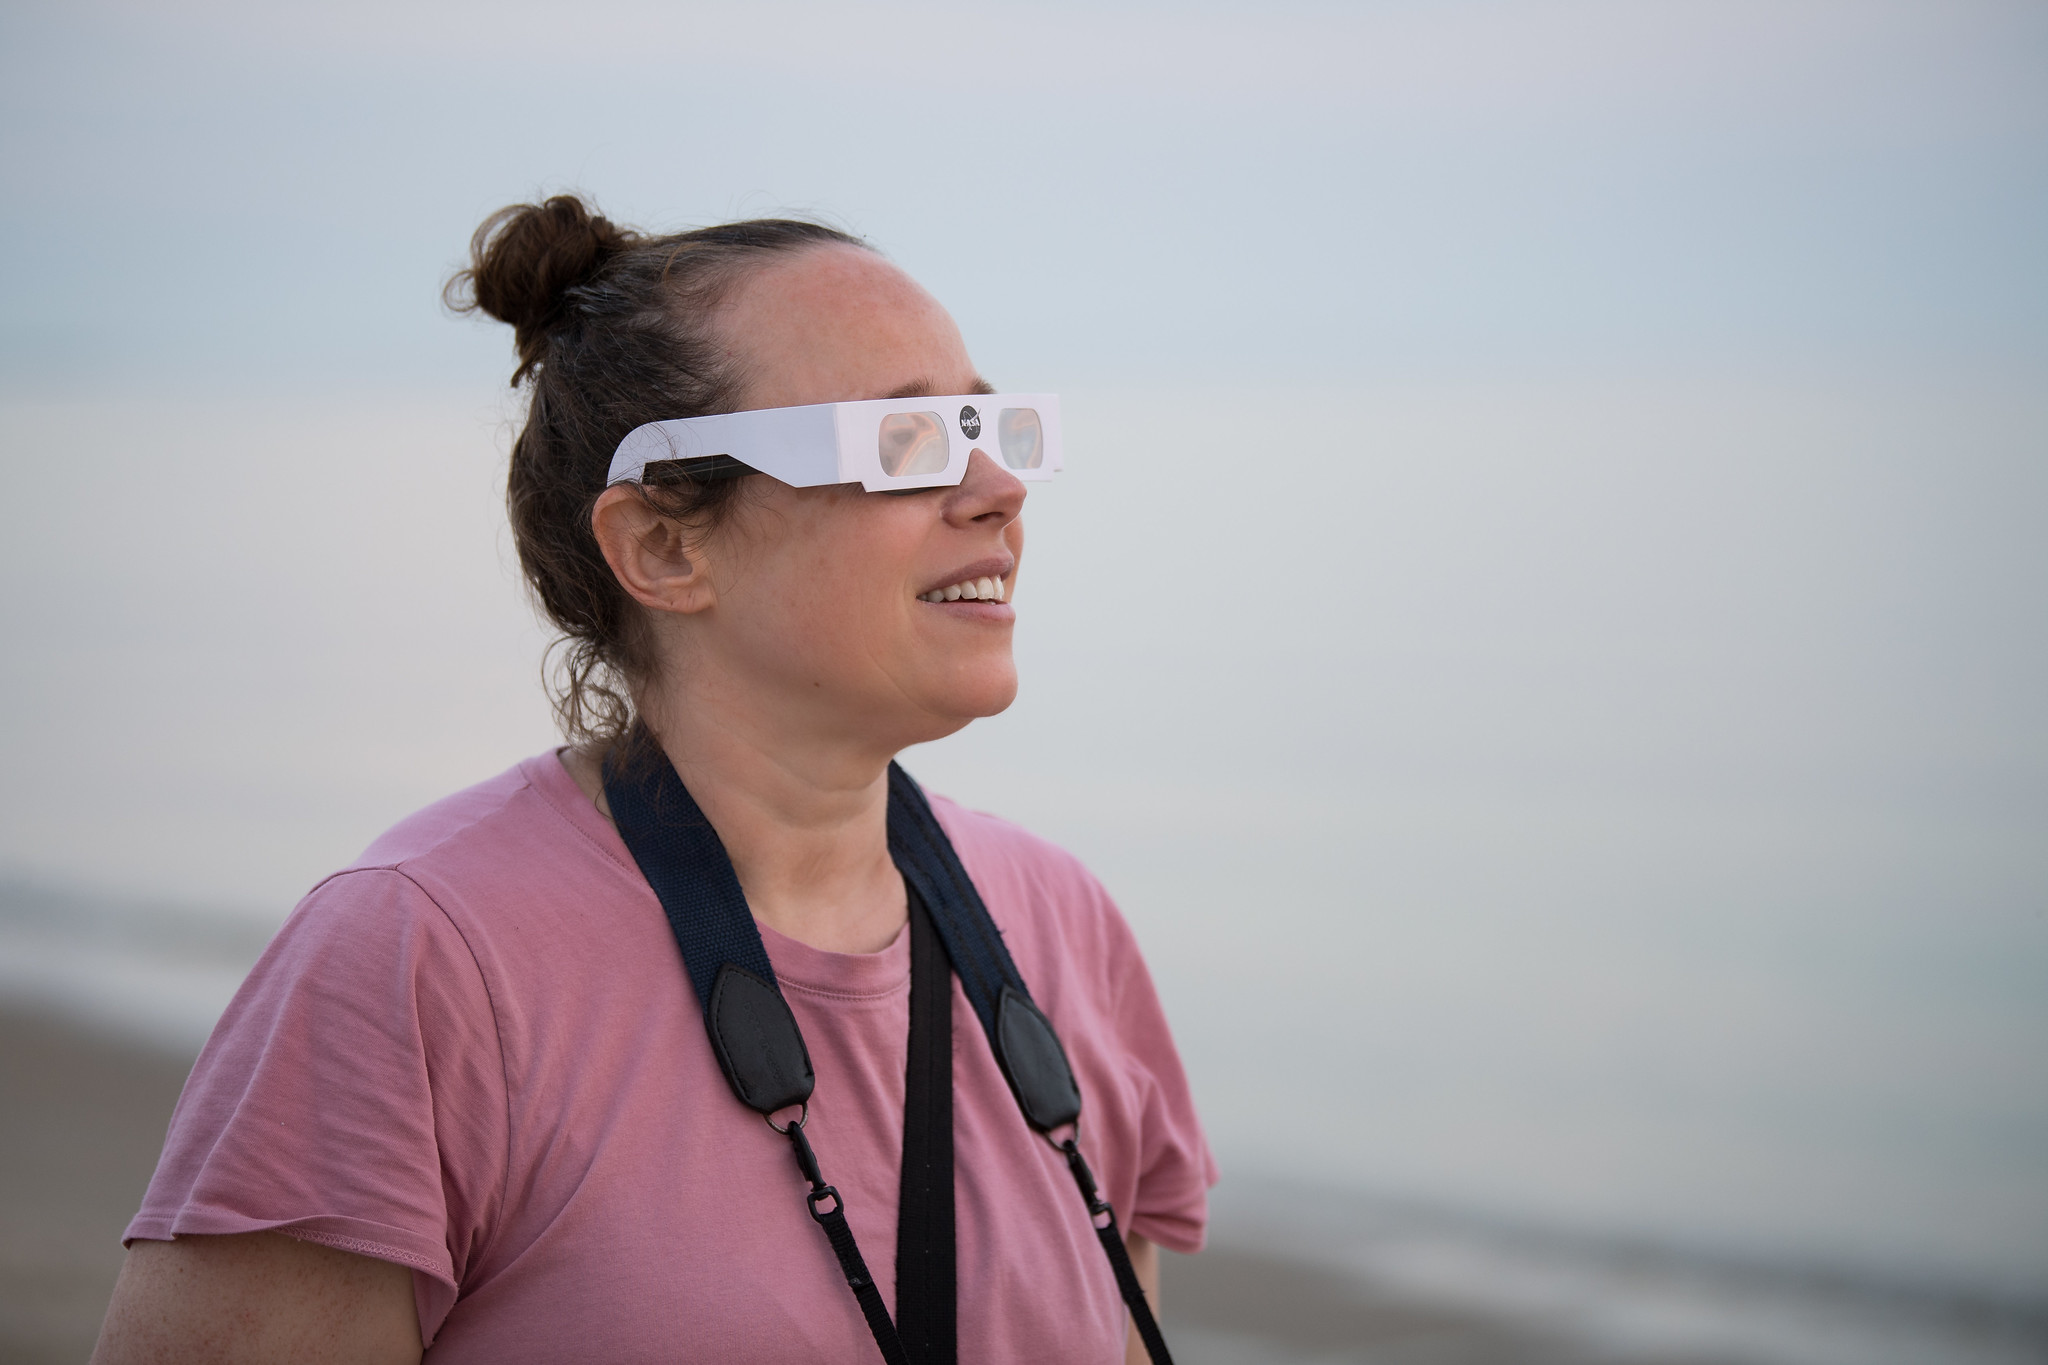 A woman, seen from the torso up, stands on a beach. She is wearing white solar viewing glasses and has a camera strap around her neck.